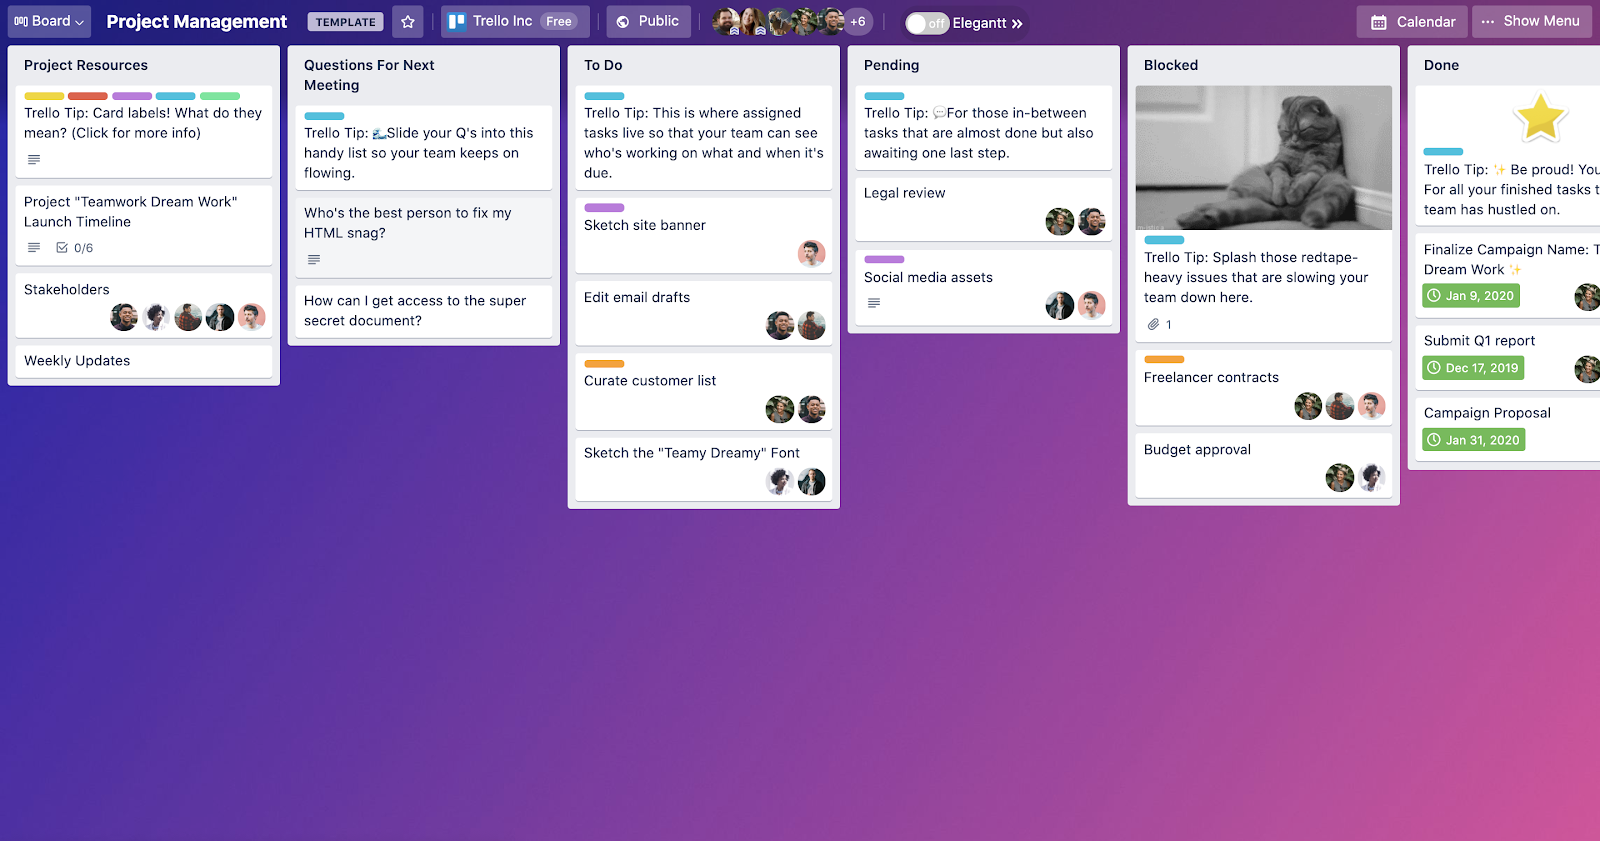 Trello board that can be used to enhance cross-team collaboration